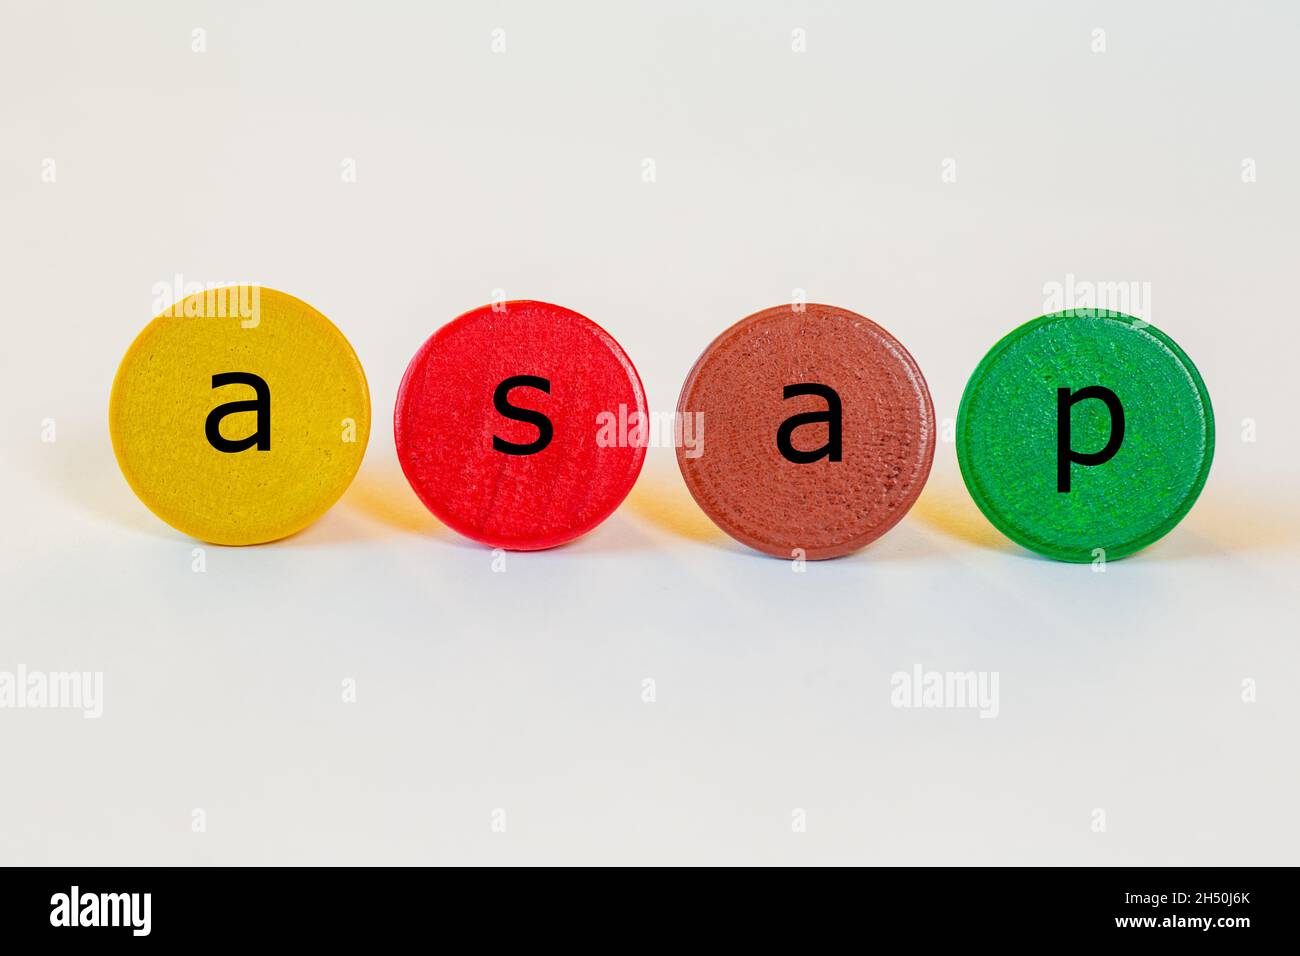 asap is an abbreviation and stands for as soon as possible. The letters stand on colorful toy wooden building blocks Stock Photo